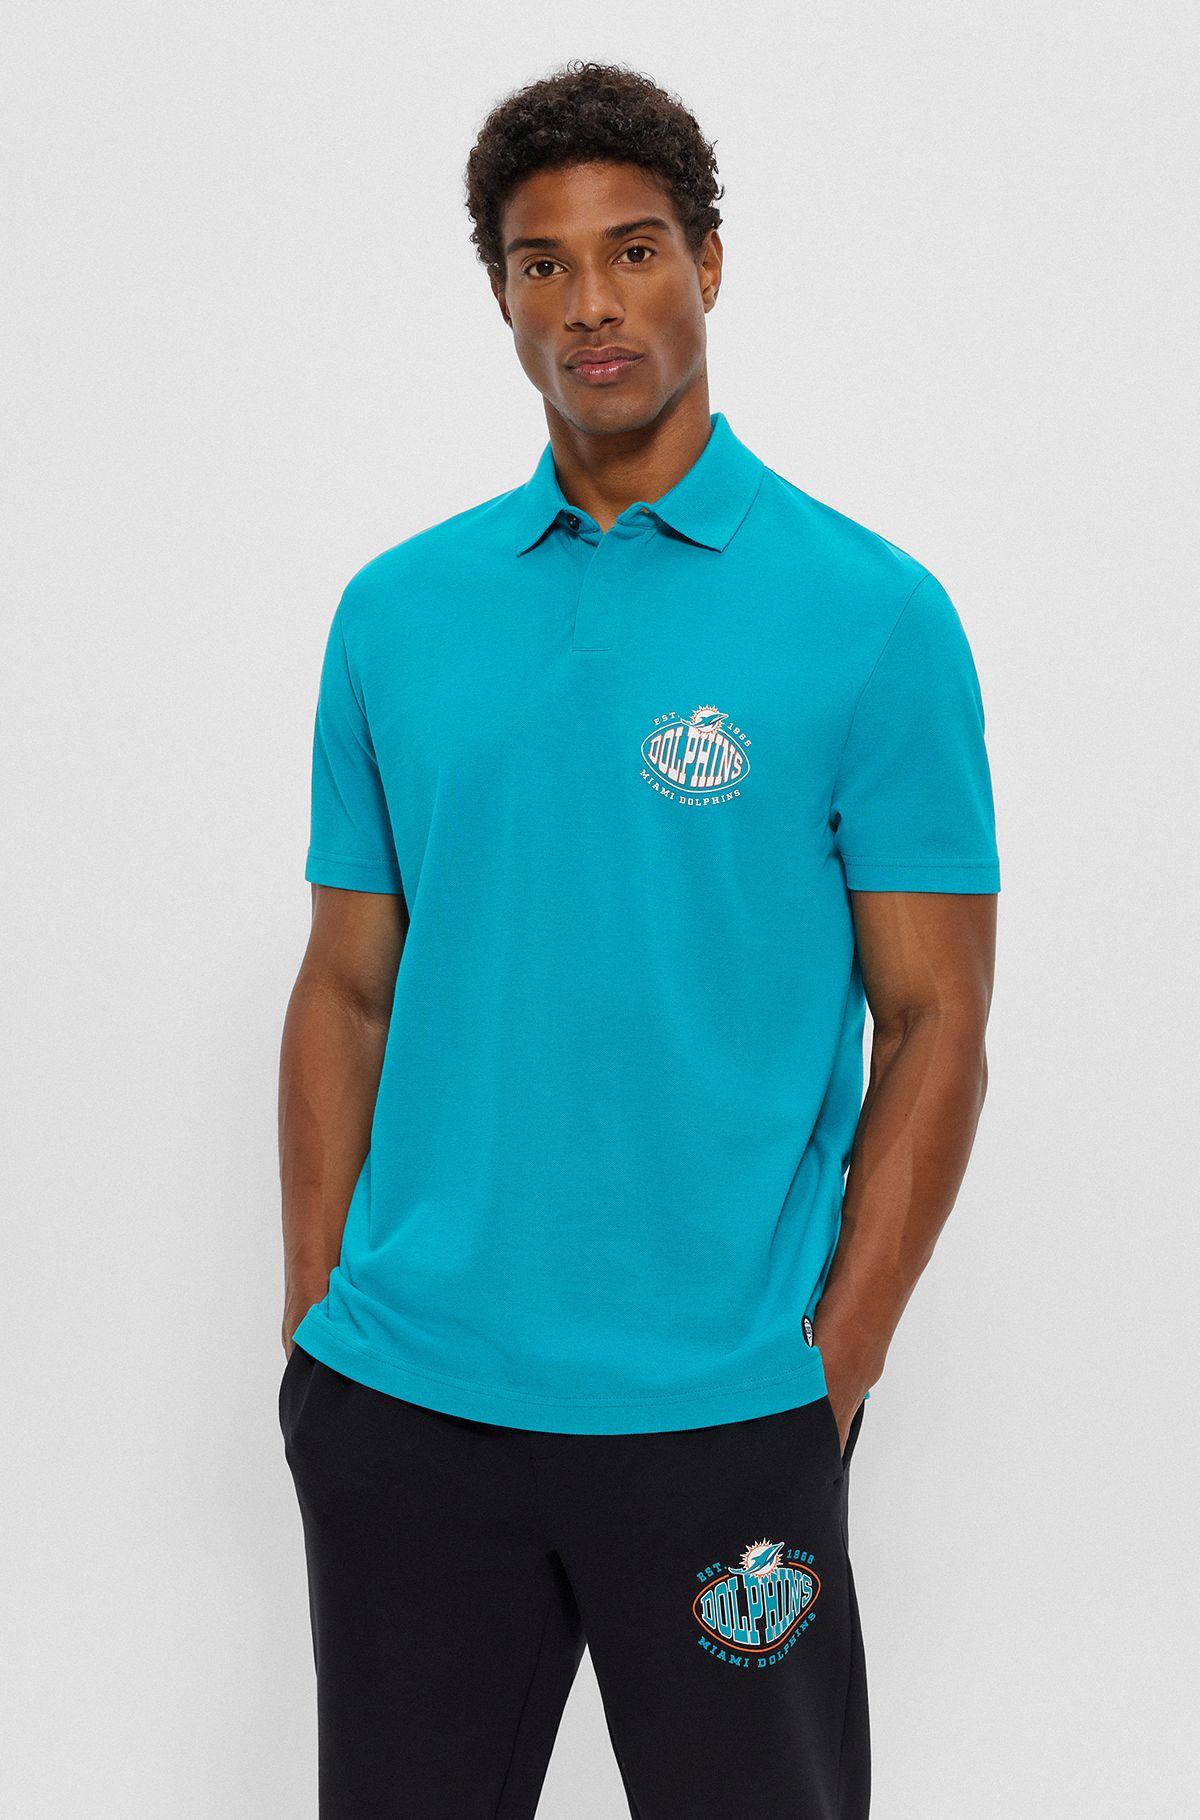 BOSS x NFL cotton-piqué polo shirt with collaborative branding, Dolphins